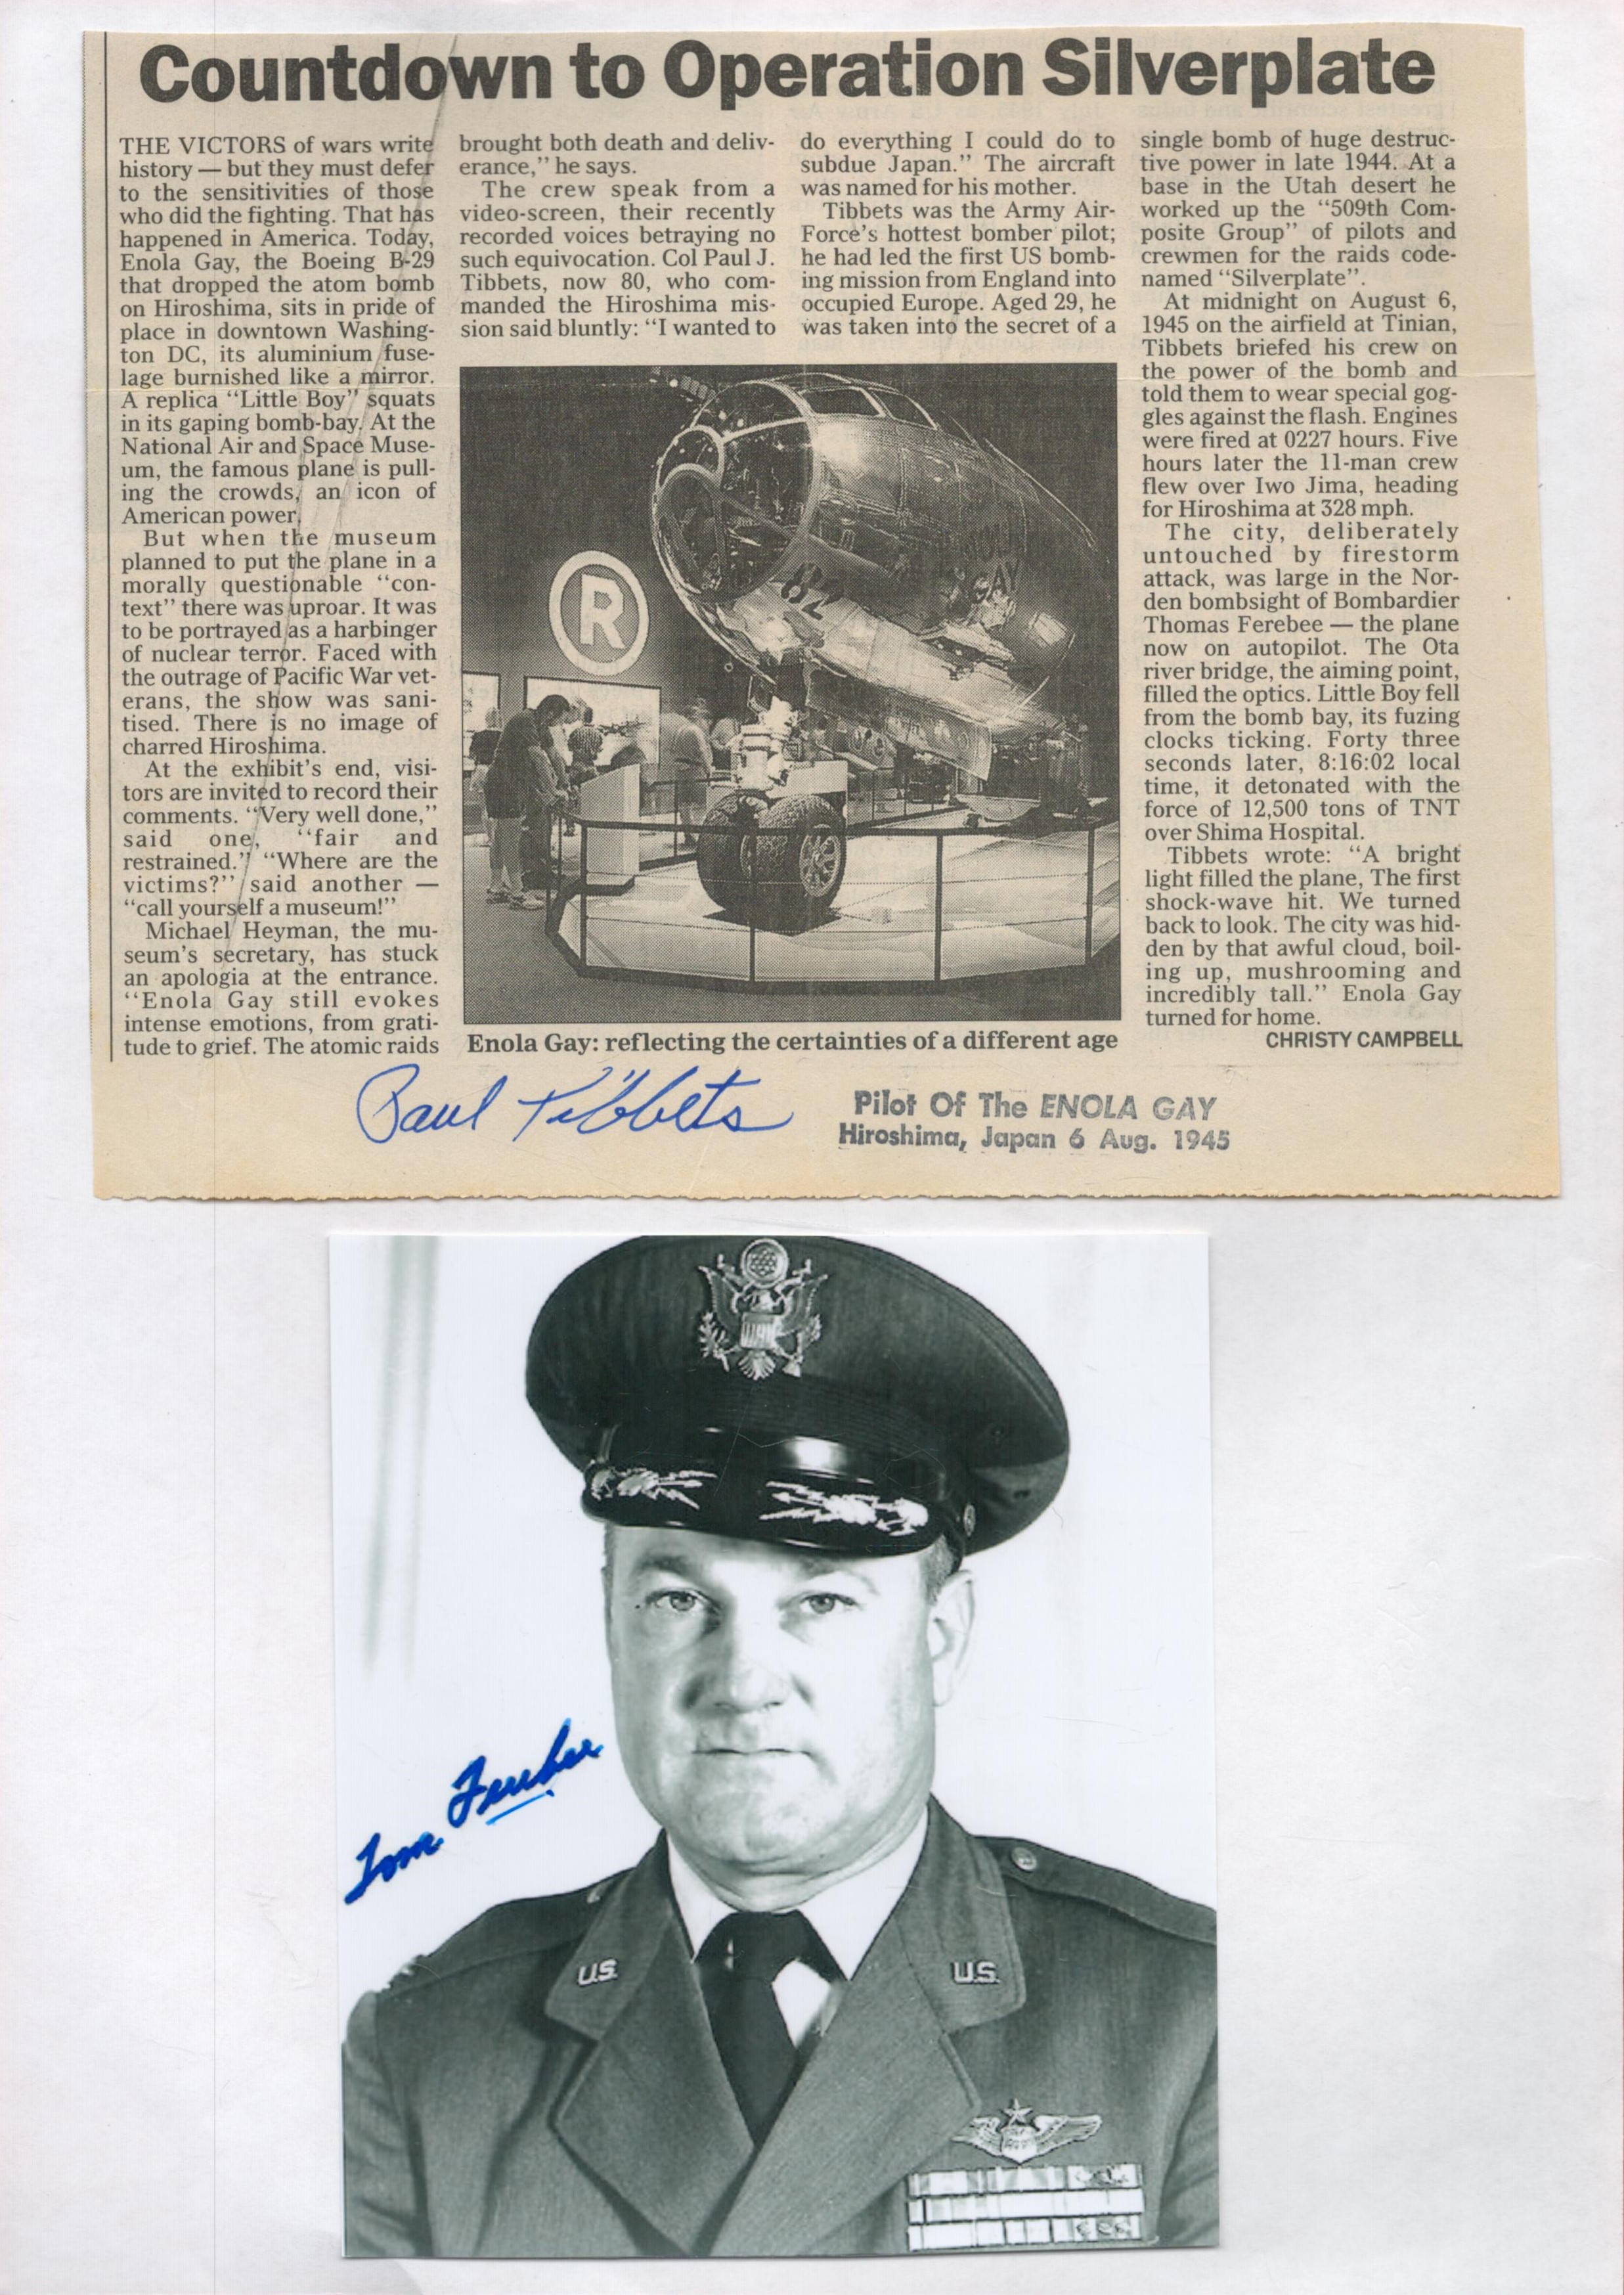 Enola Gay Pilots Paul Tibbets and Tom Ferebee Signed Items. Tibbets Signed on Newspaper Clipping,